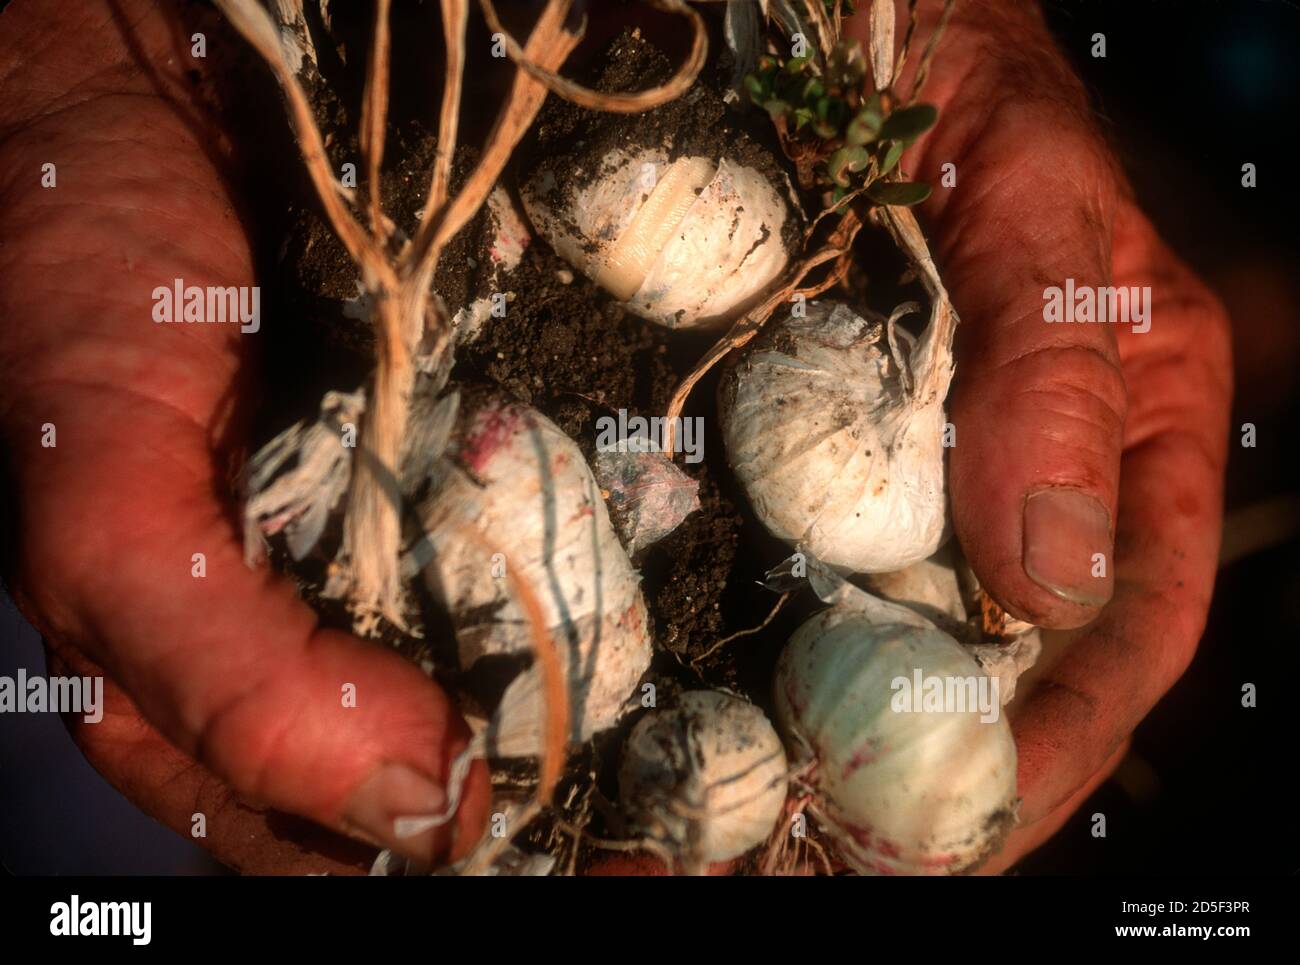 Dirty hands of gardener holding onions Stock Photo